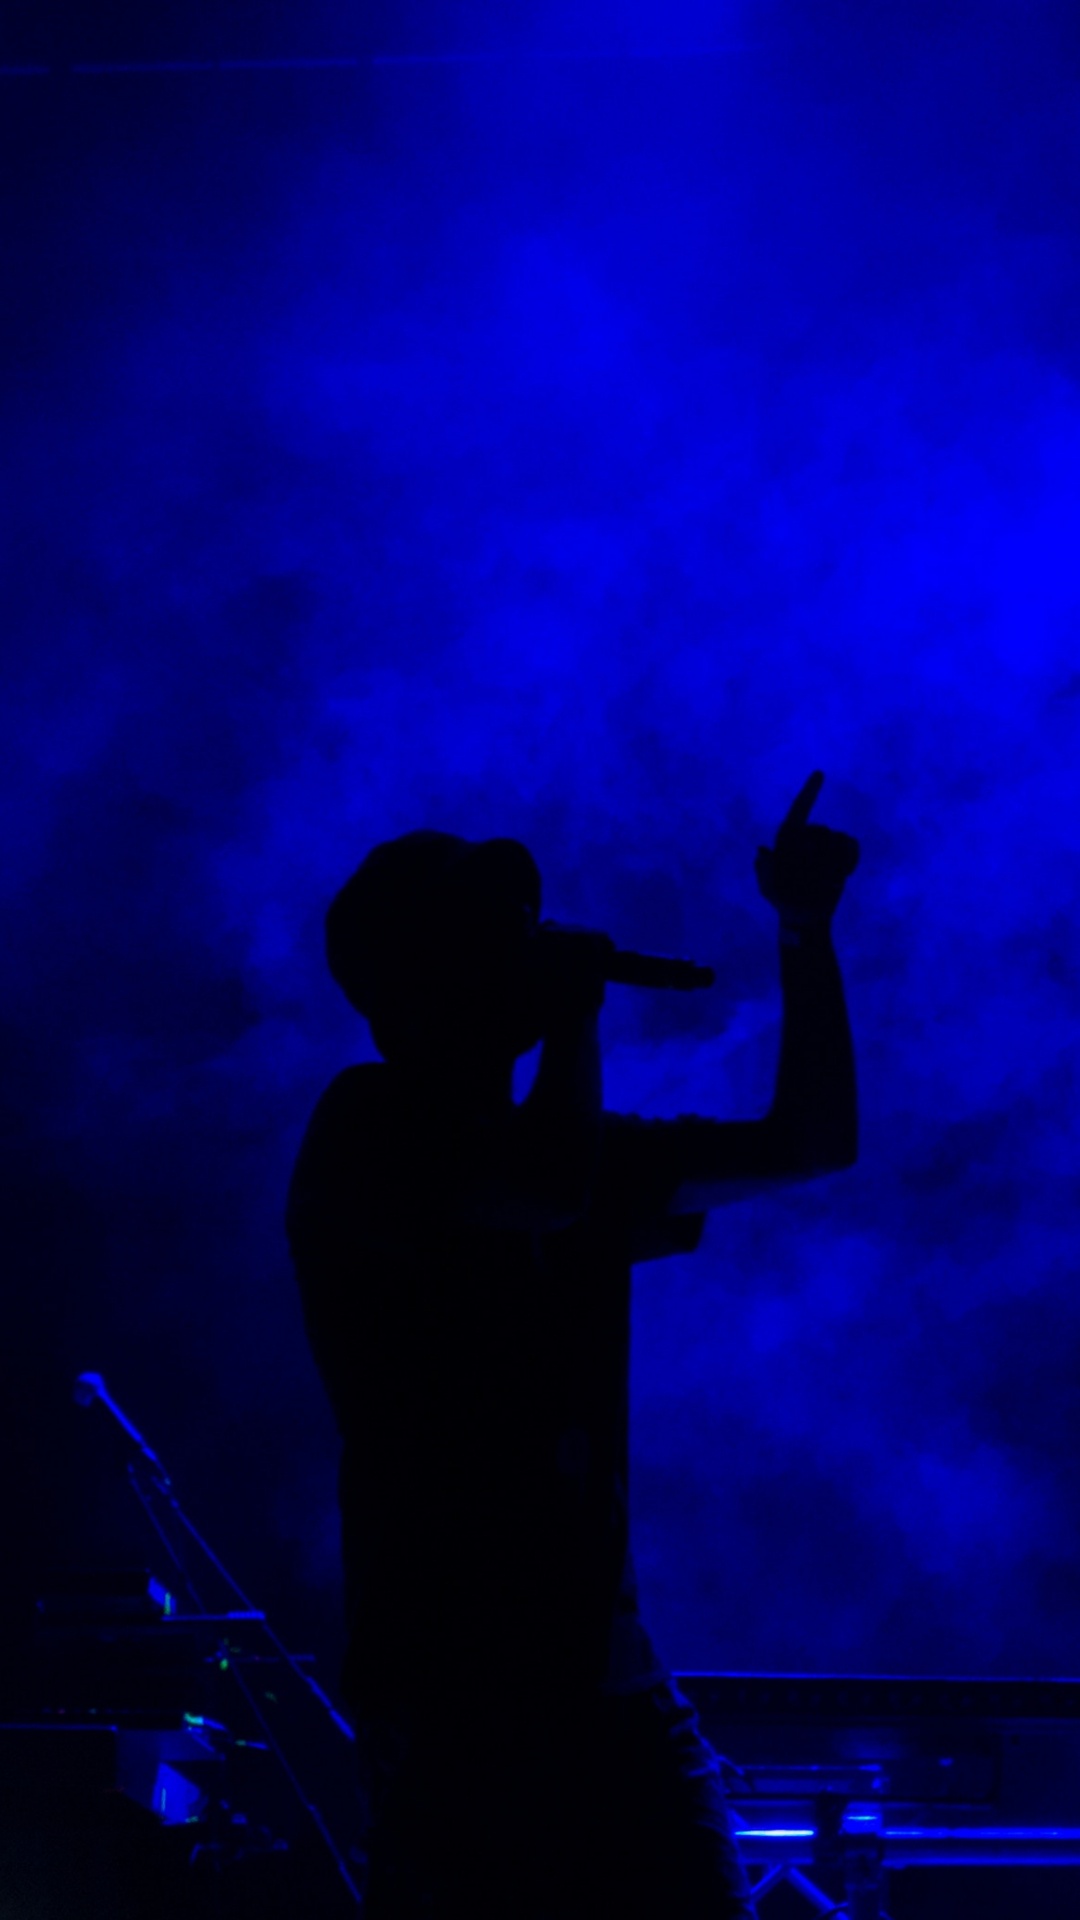 Singer Silhouette, Performance, Blue, Entertainment, Performing Arts. Wallpaper in 1080x1920 Resolution